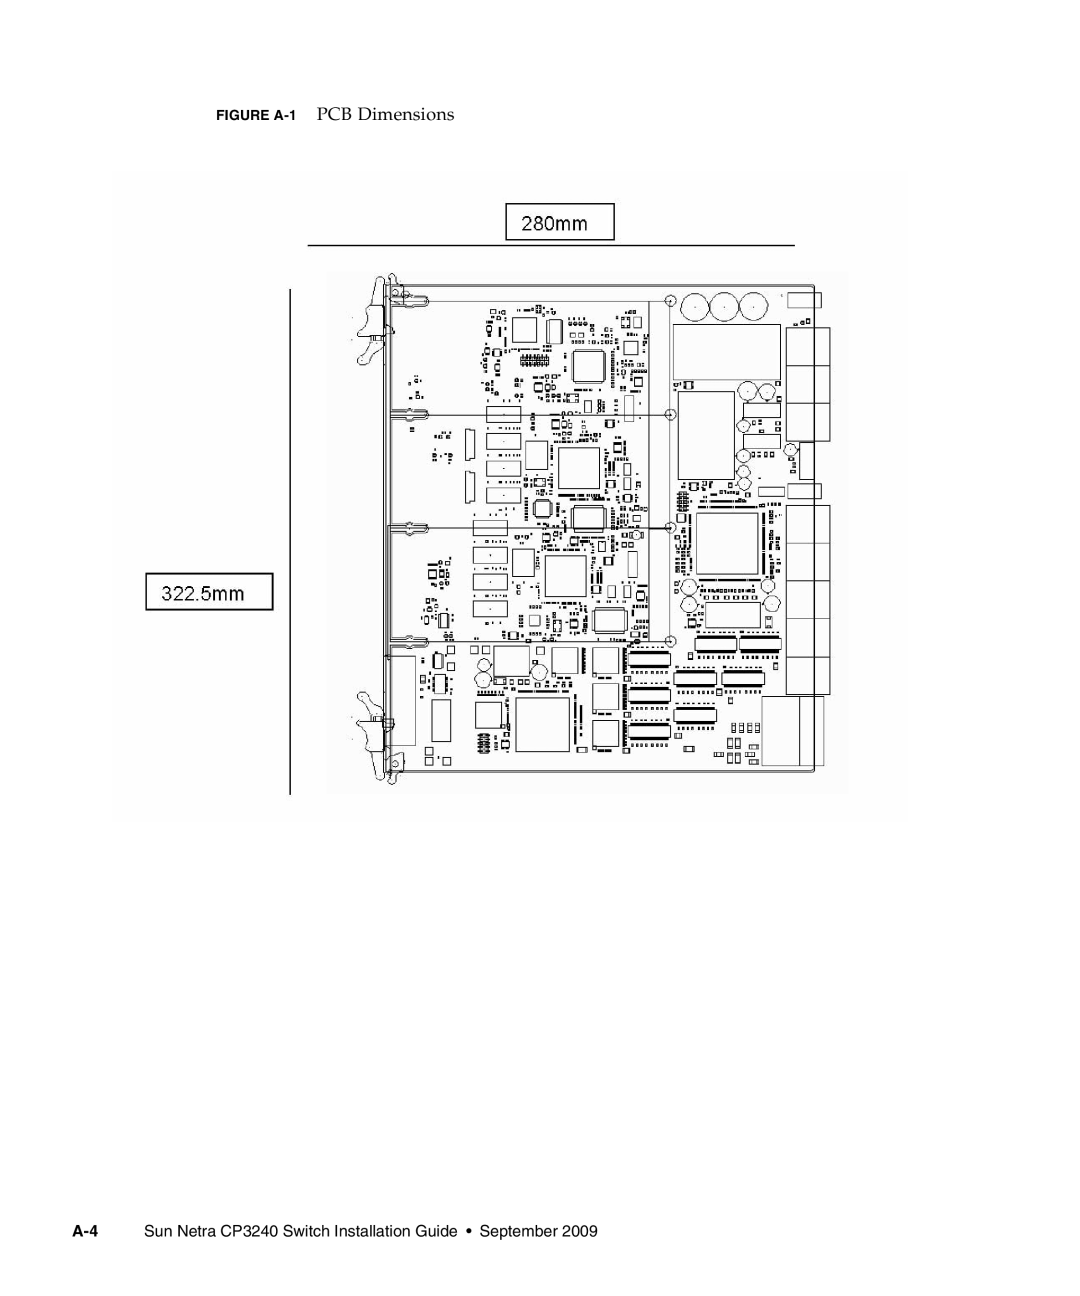 Sun Microsystems manual FIGURE A-1 PCB Dimensions, A-4 Sun Netra CP3240 Switch Installation Guide September 